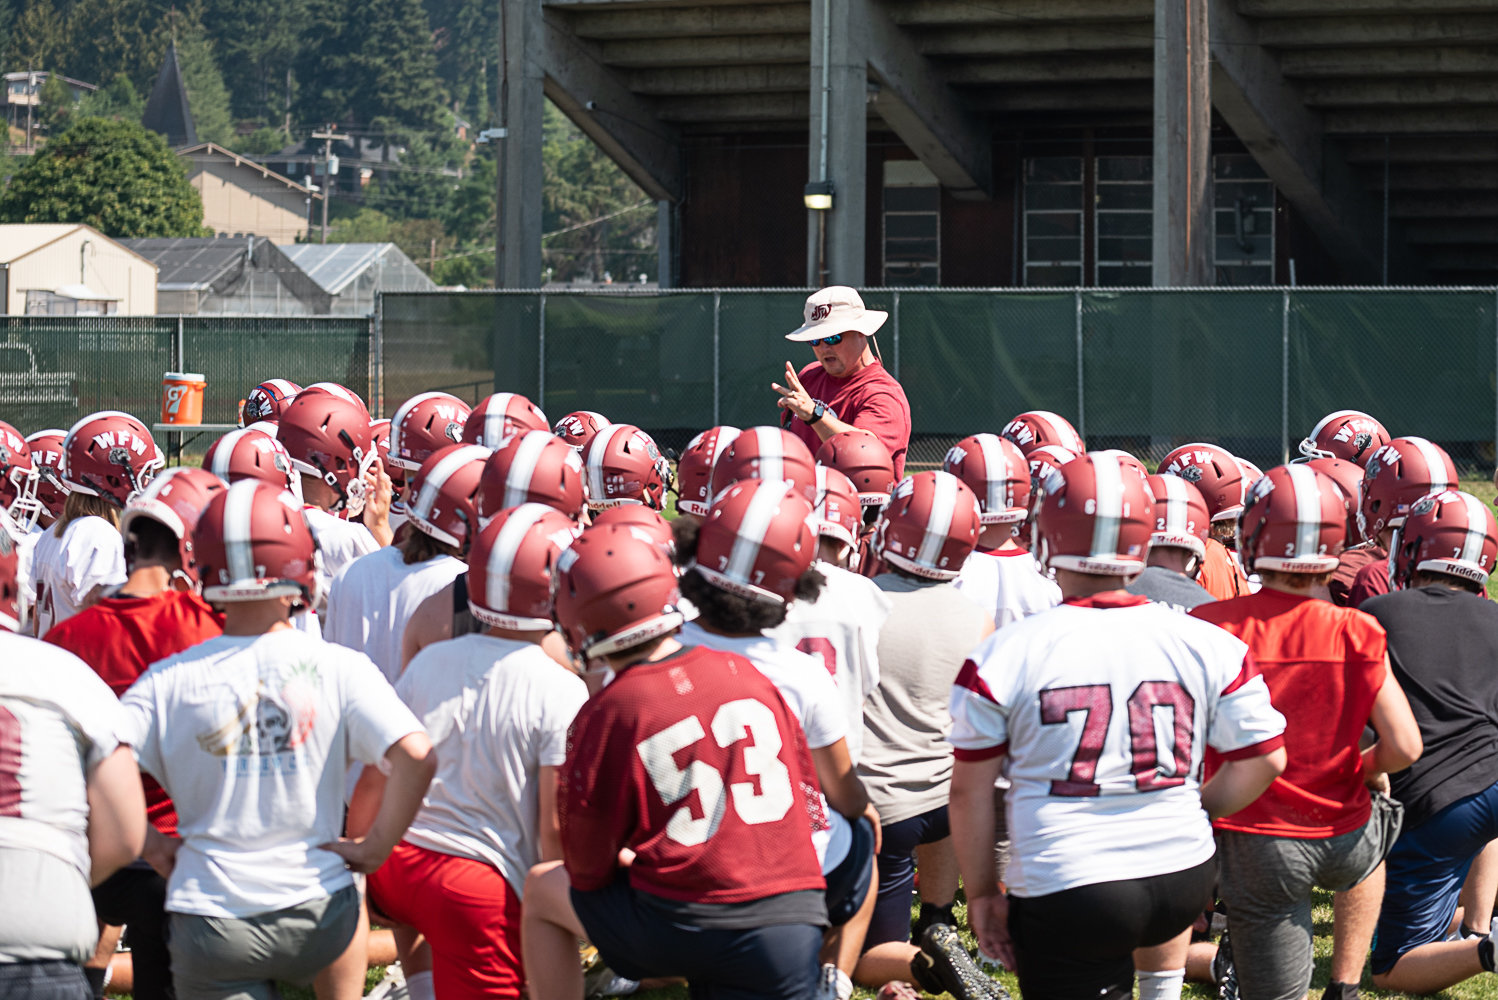 W.F. West coach Dan Hill talks with his team during the first day of fall camp in Chehalis Aug. 17.